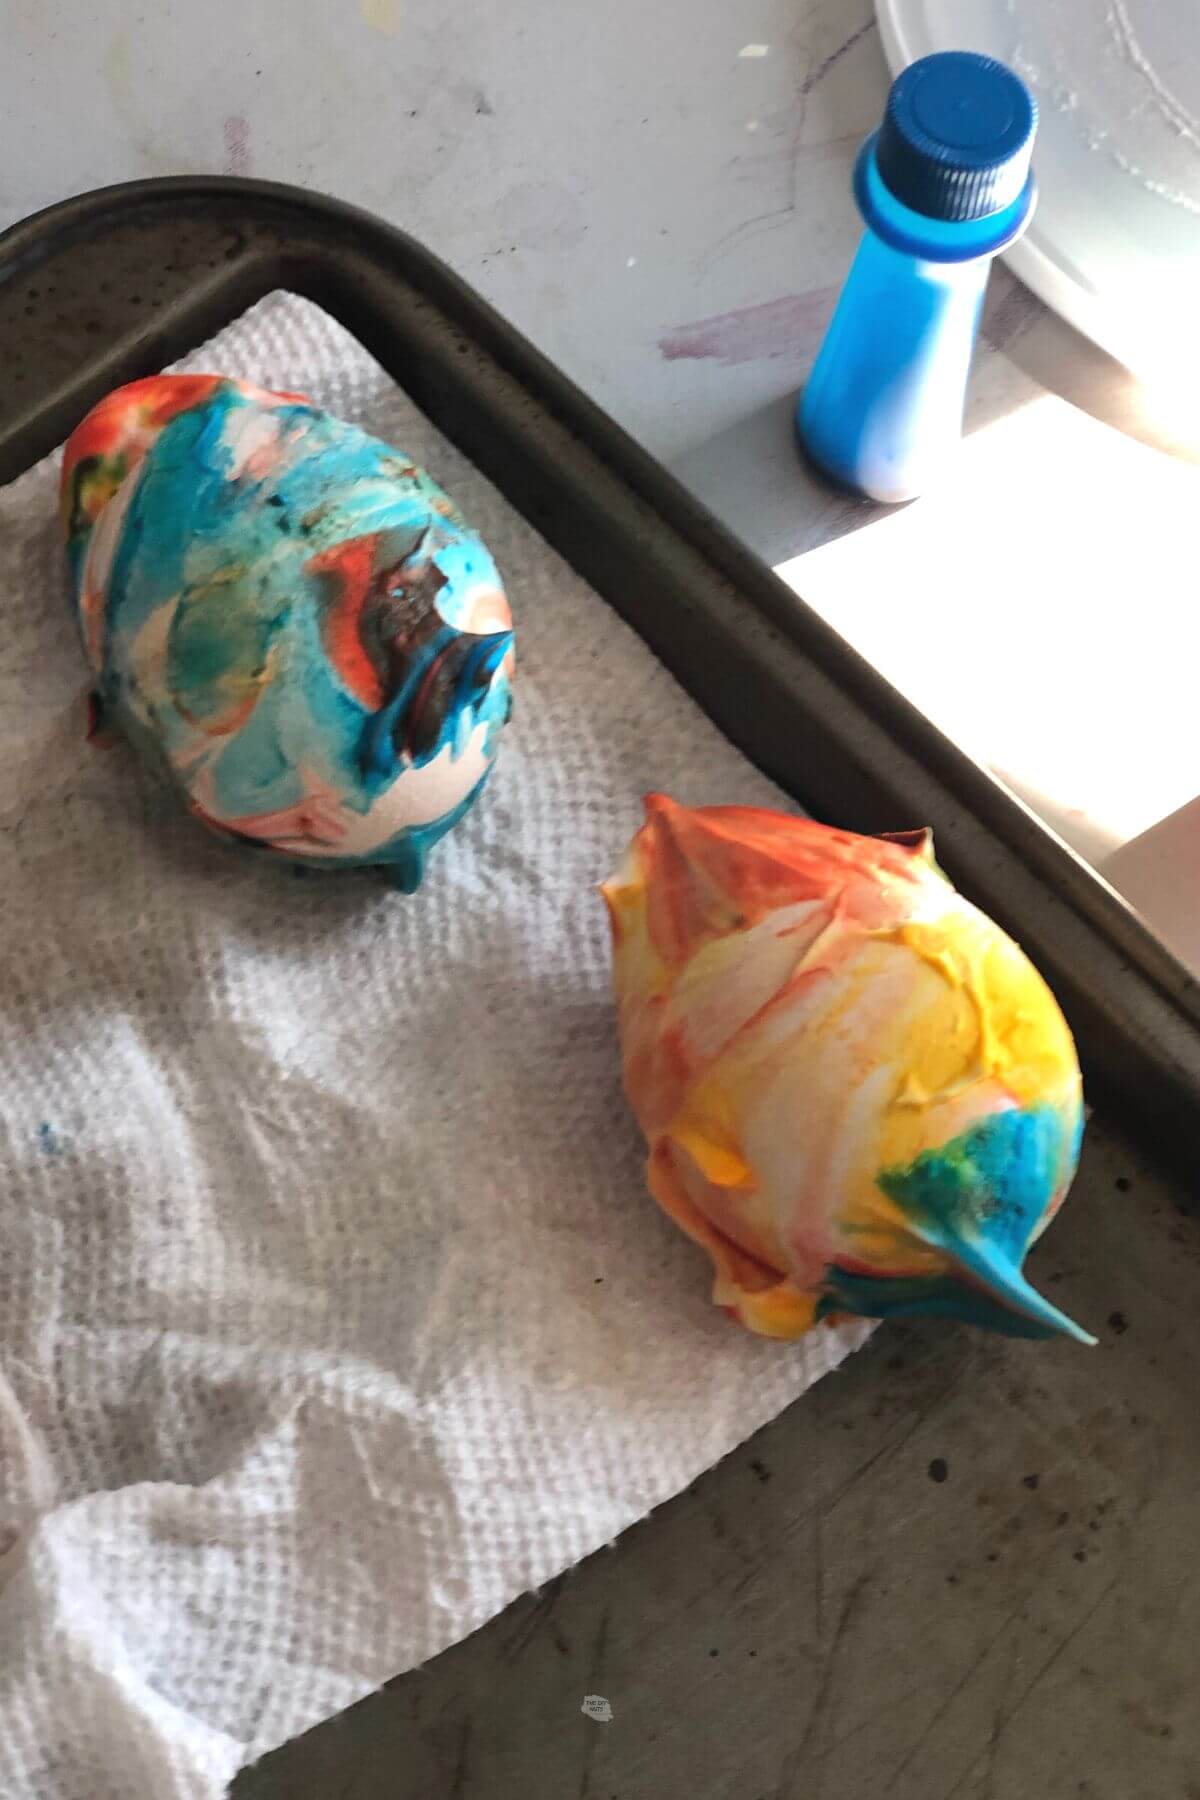 shaving cream and food coloring mixture on 2 eggs.